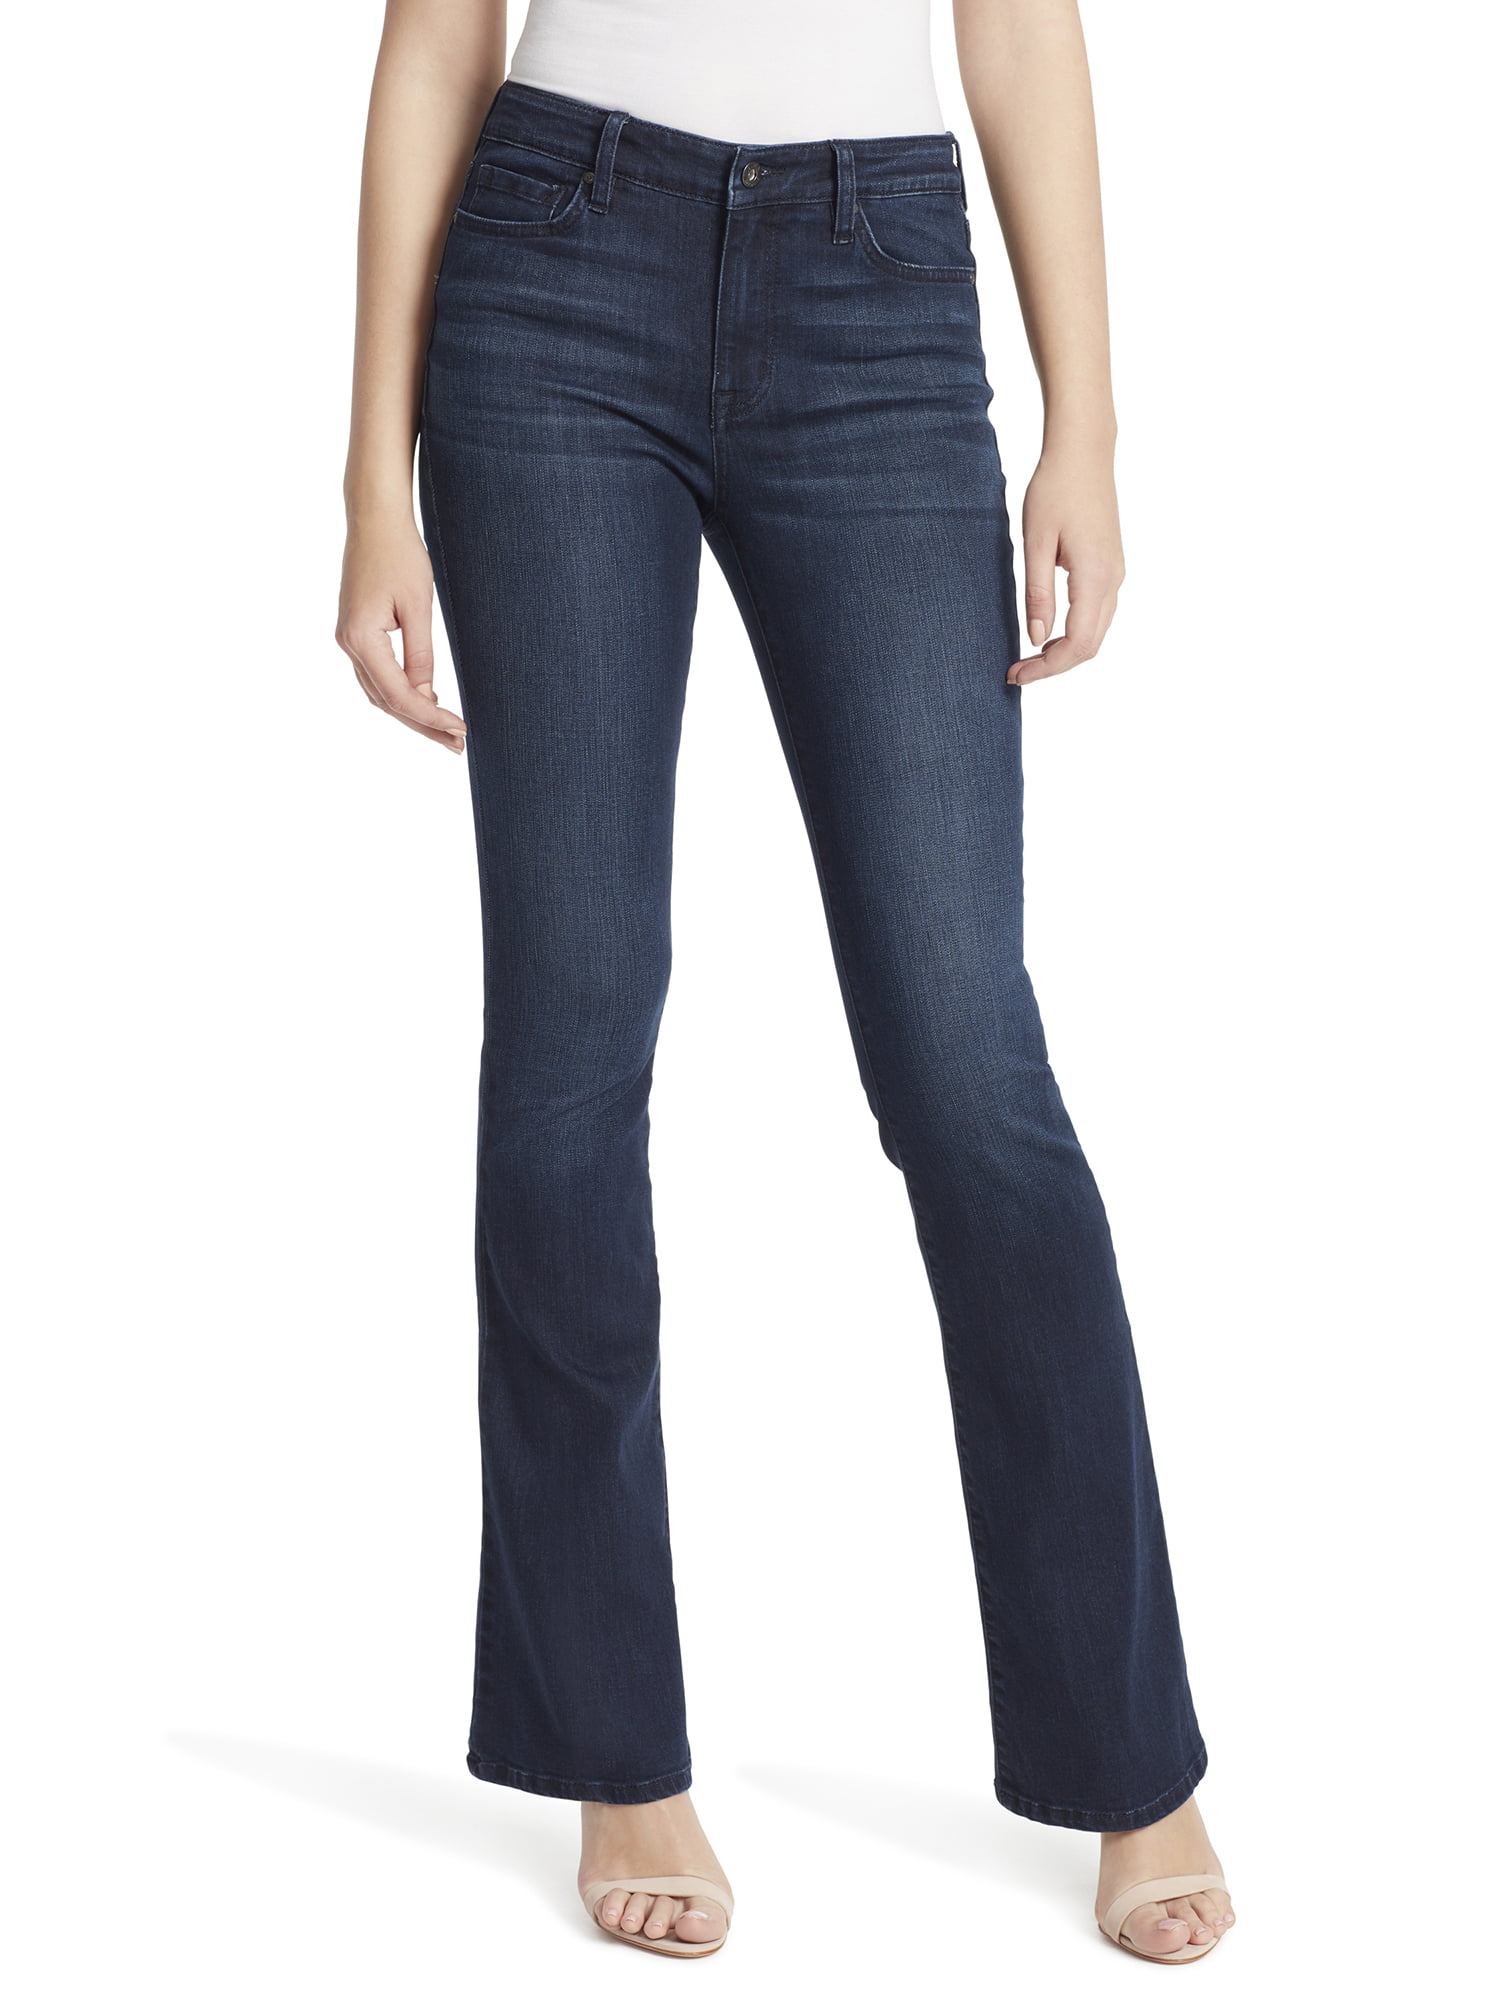 Jessica Simpson Women's Truly Yours Bootcut Jean 